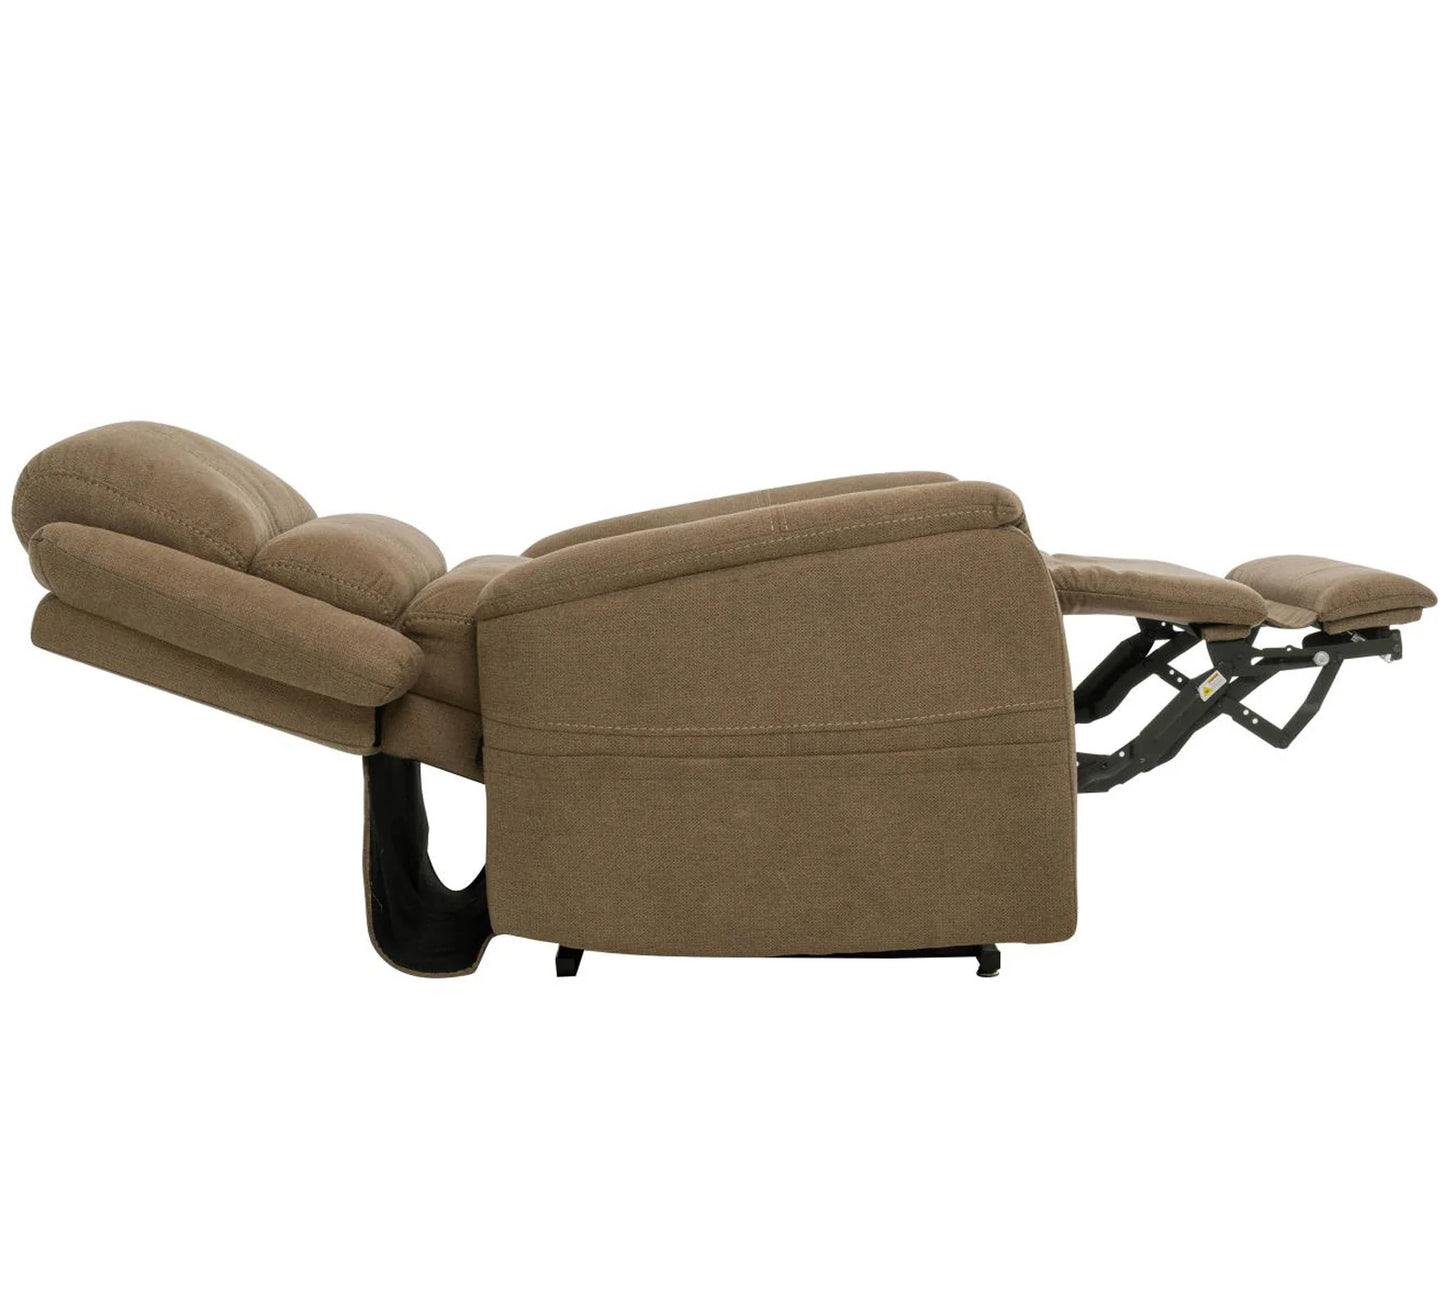 MM-3603 Lay-Flat Chaise Lounger